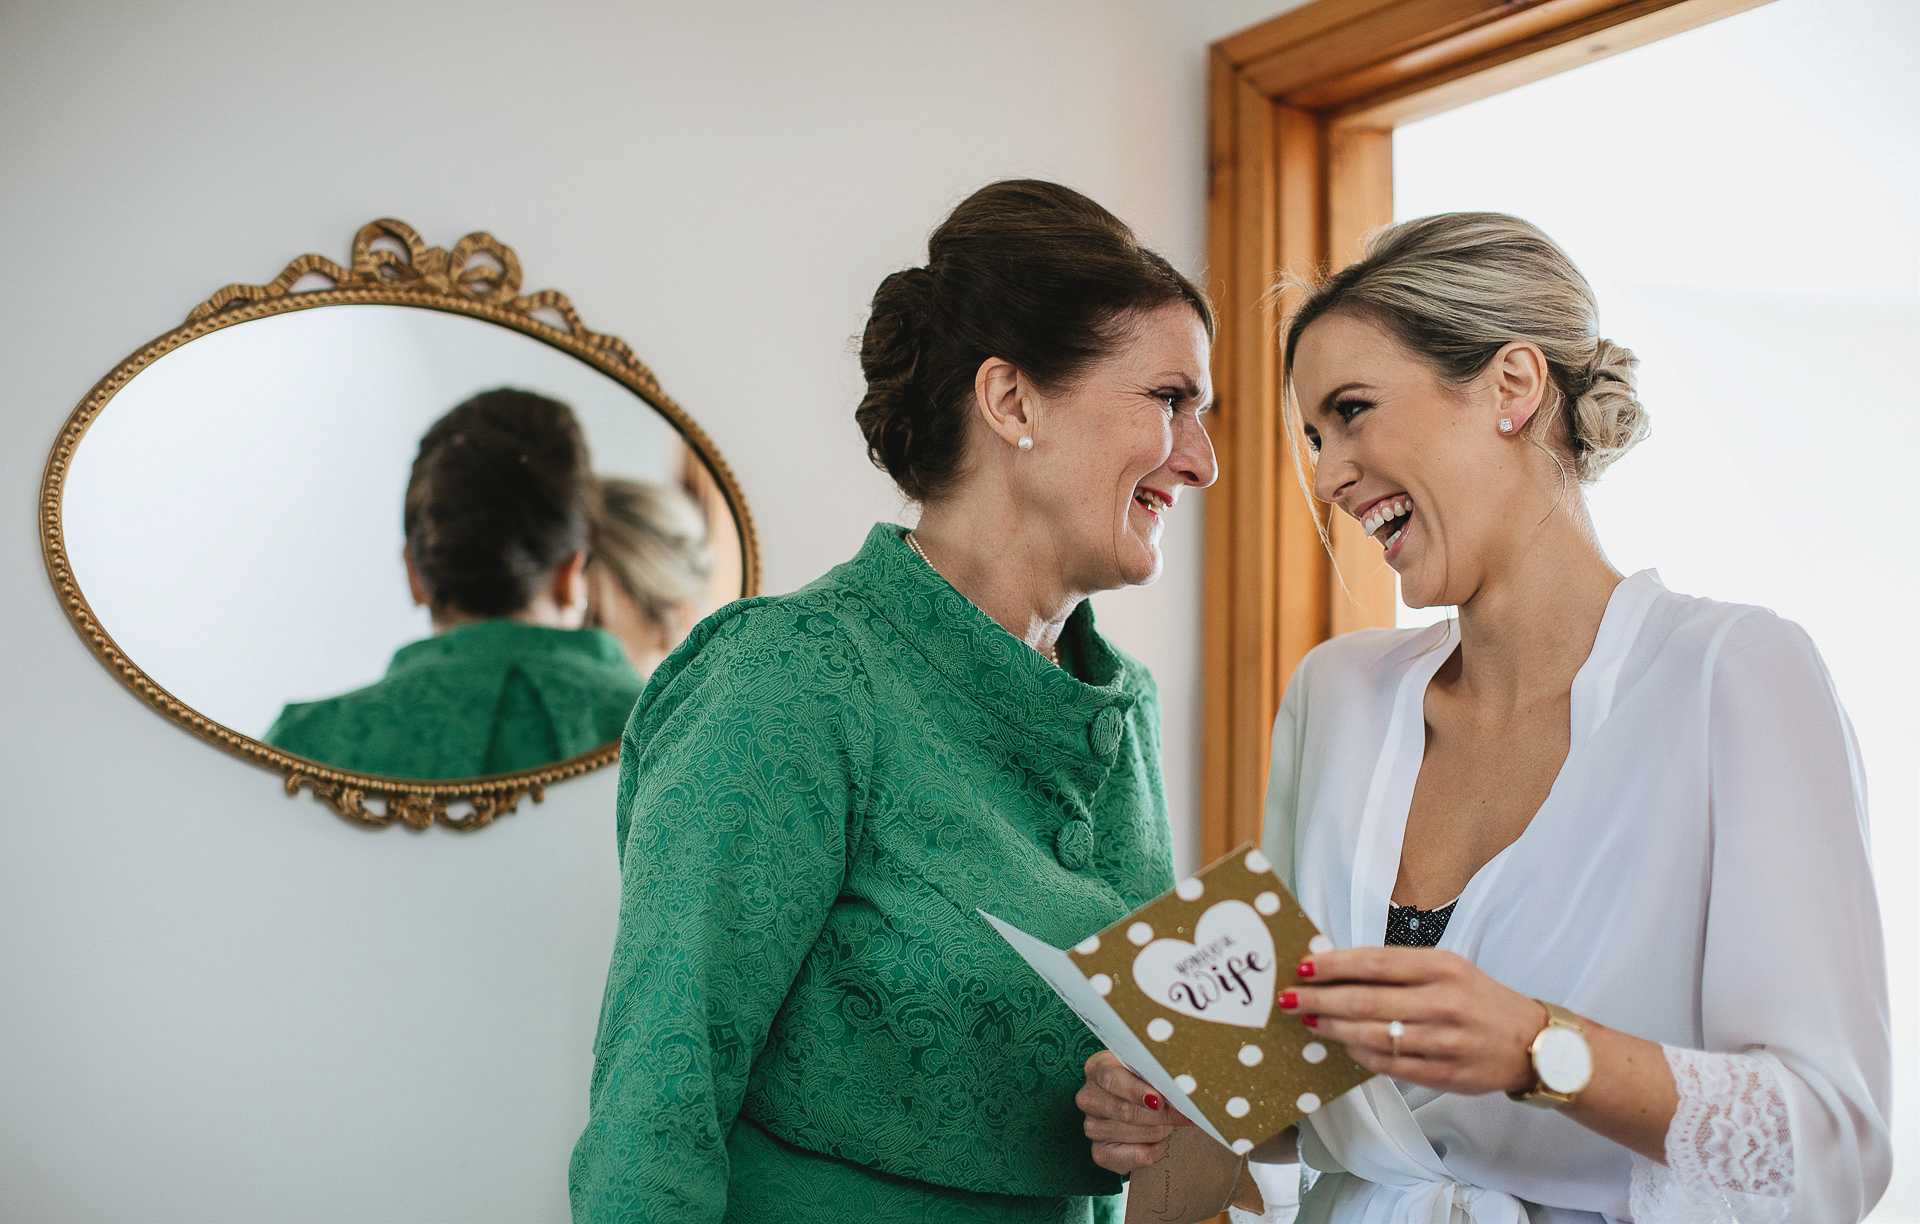 Bride to be and mother laughing together